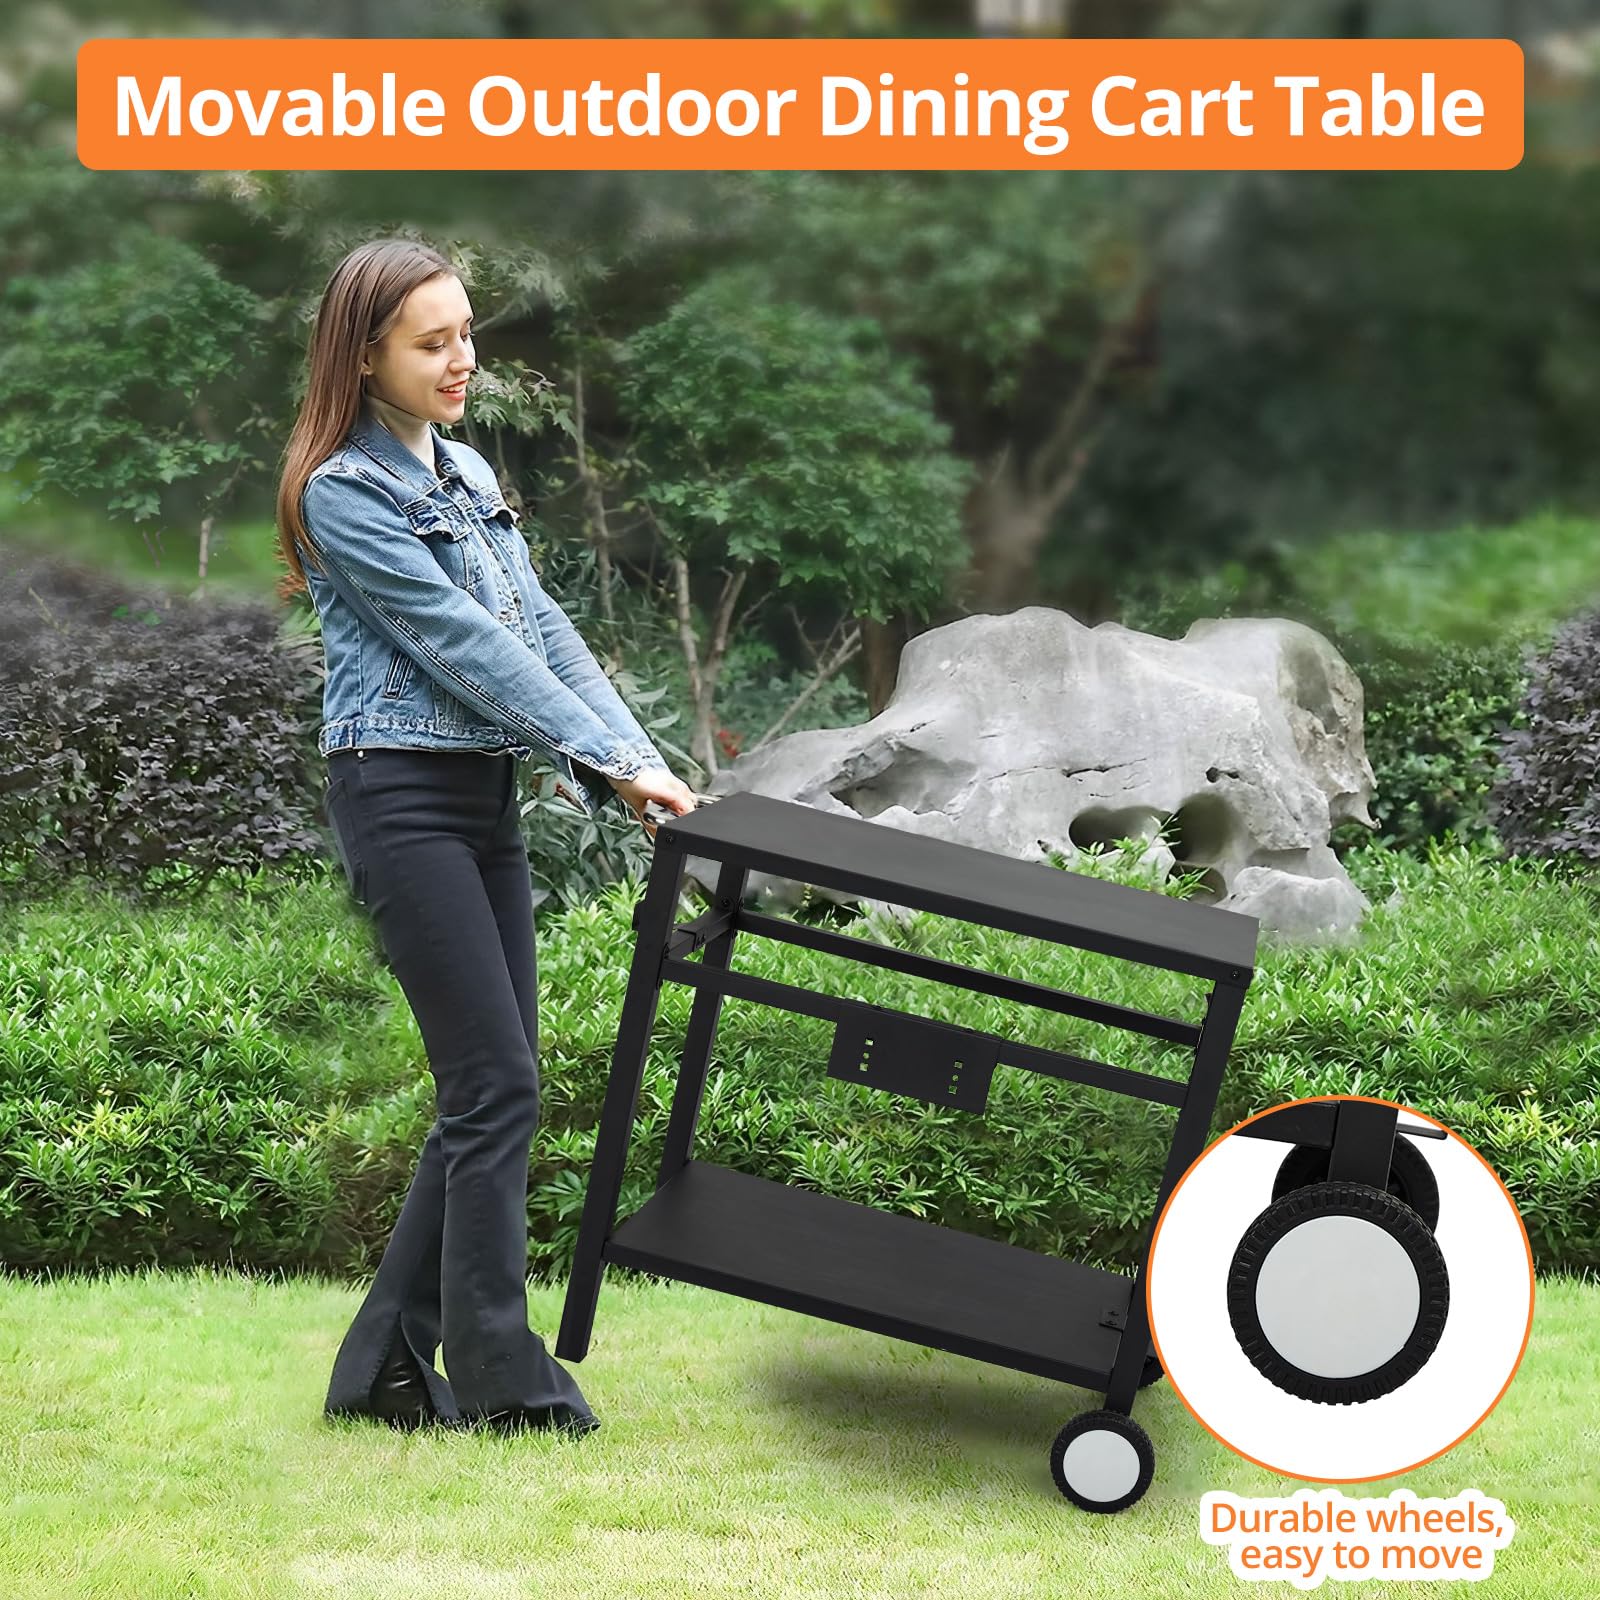 Outdoor Grill Cart with Wheels & Hooks for Pizza Oven